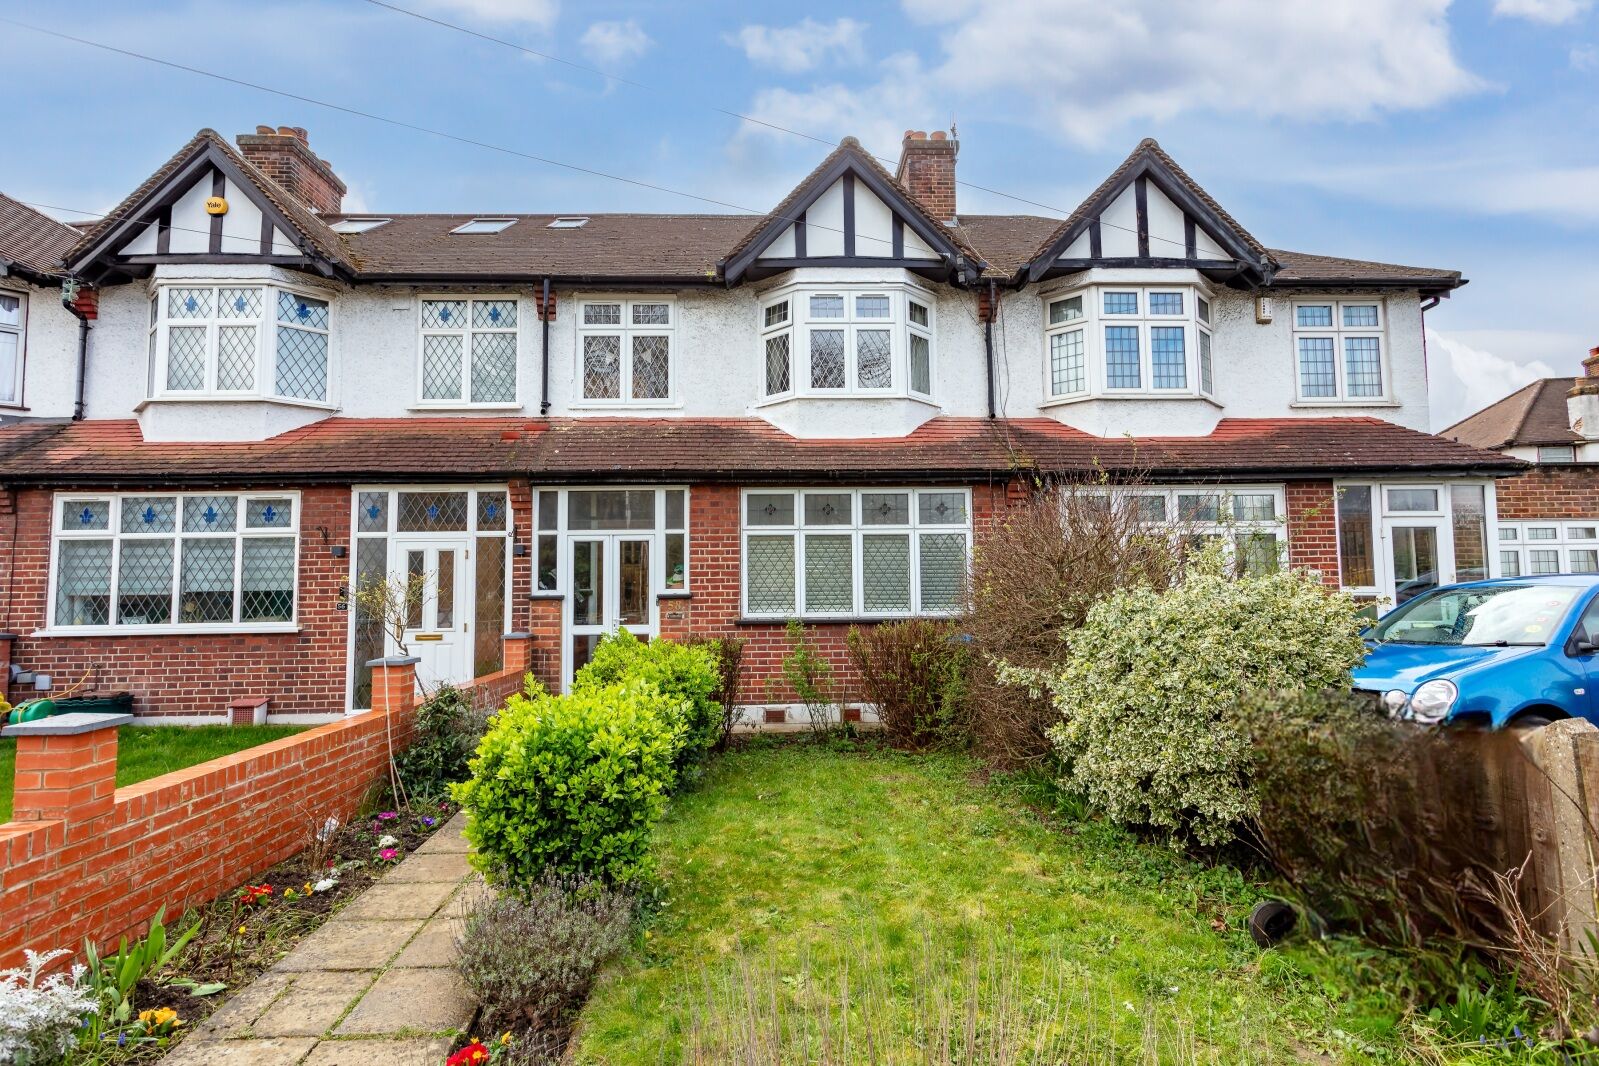 3 bedroom mid terraced house for sale Martin Way, Morden, SM4, main image